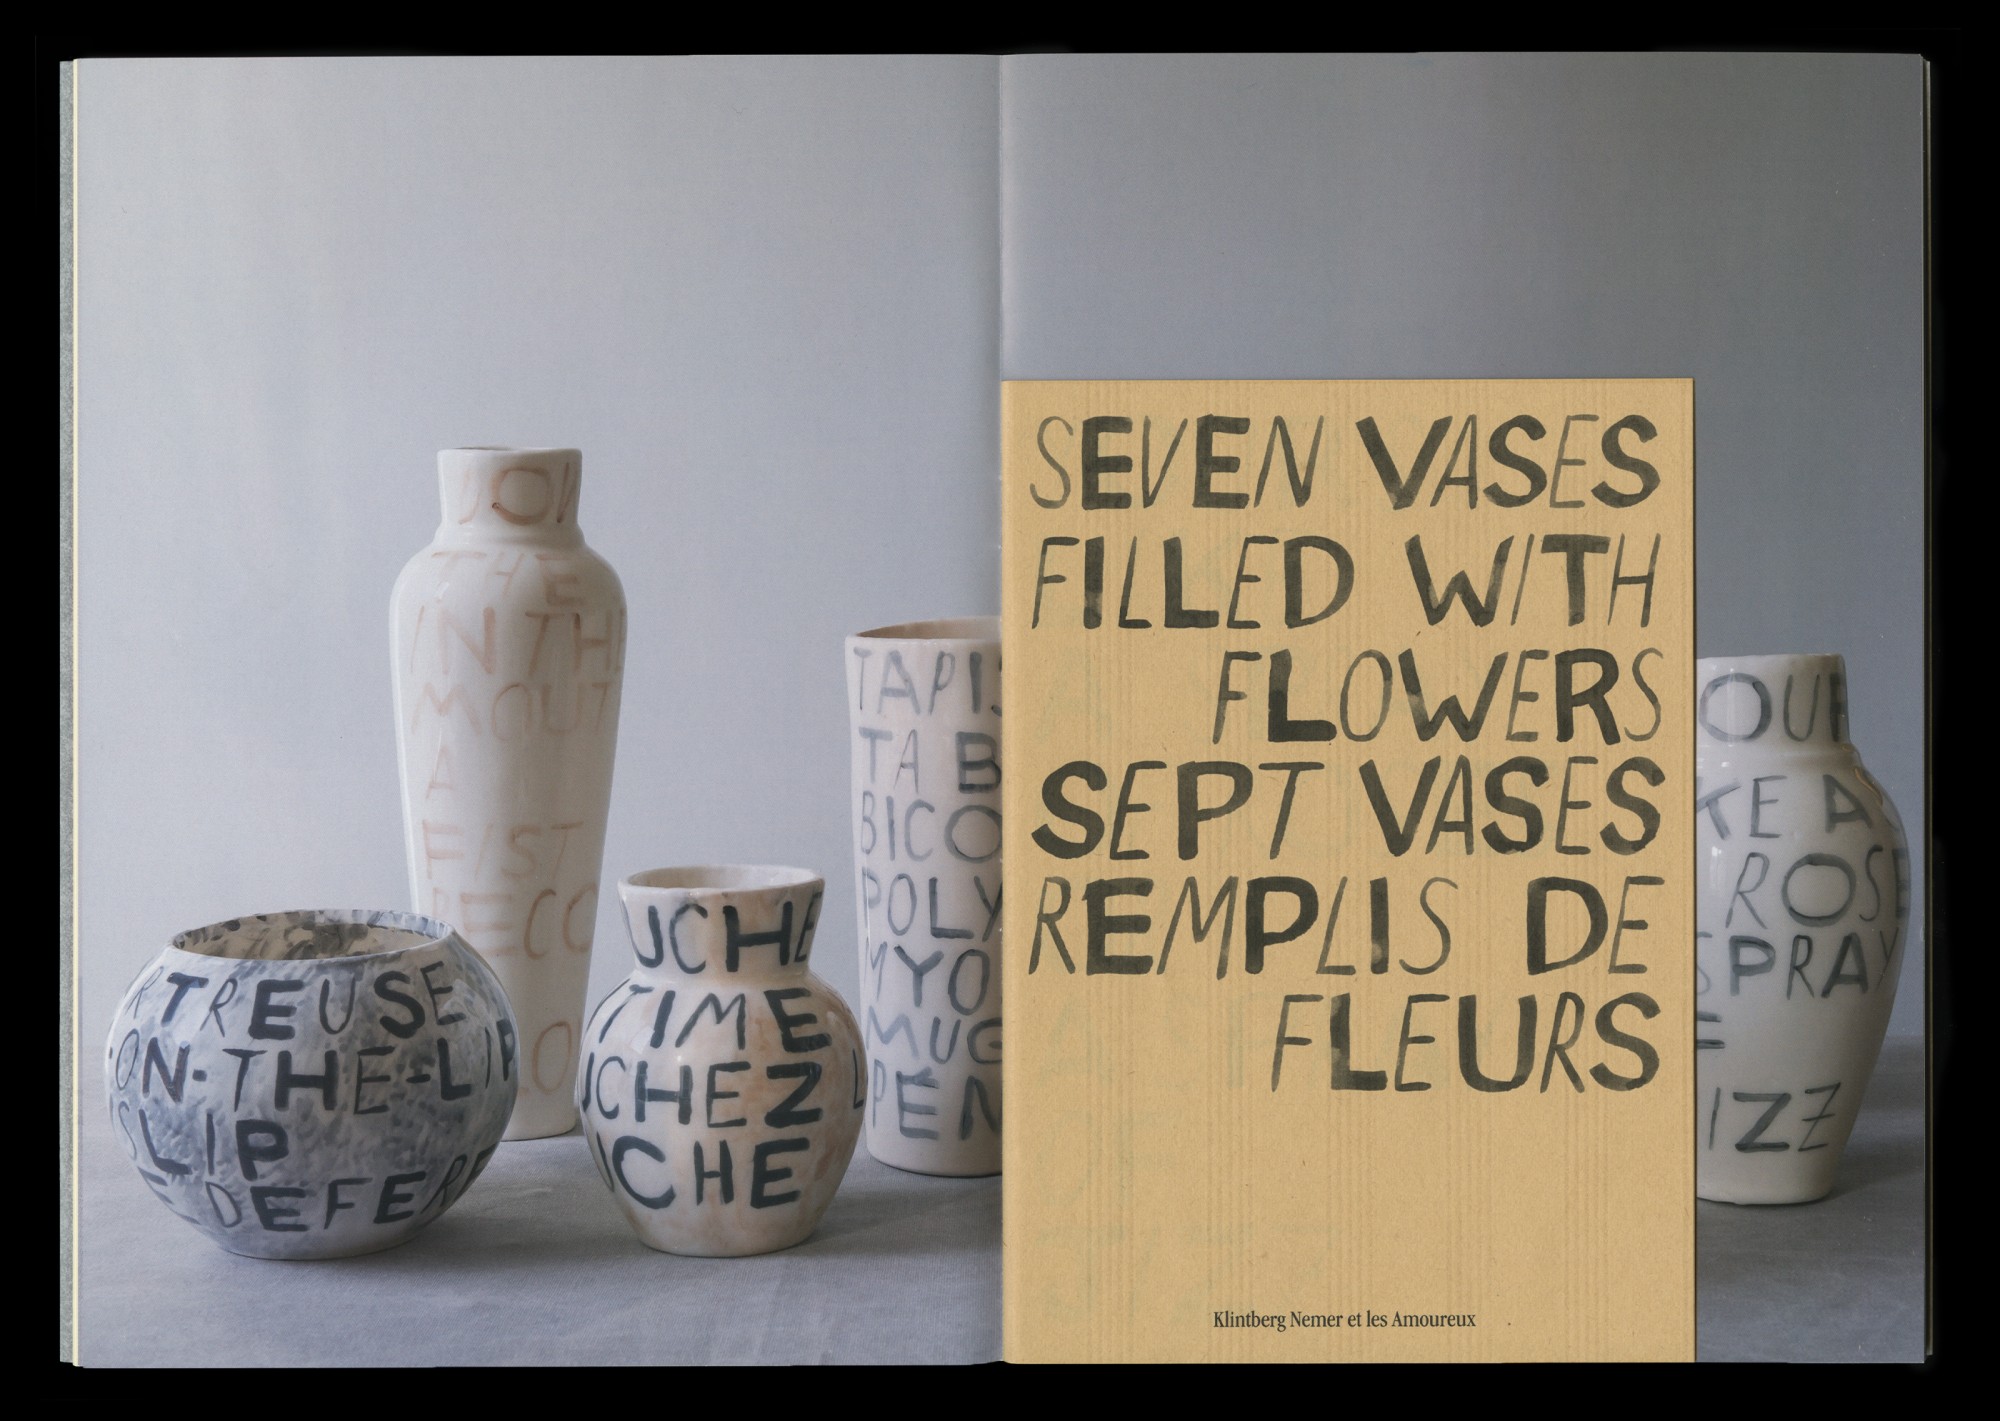 Seven vases filled with flowers 8